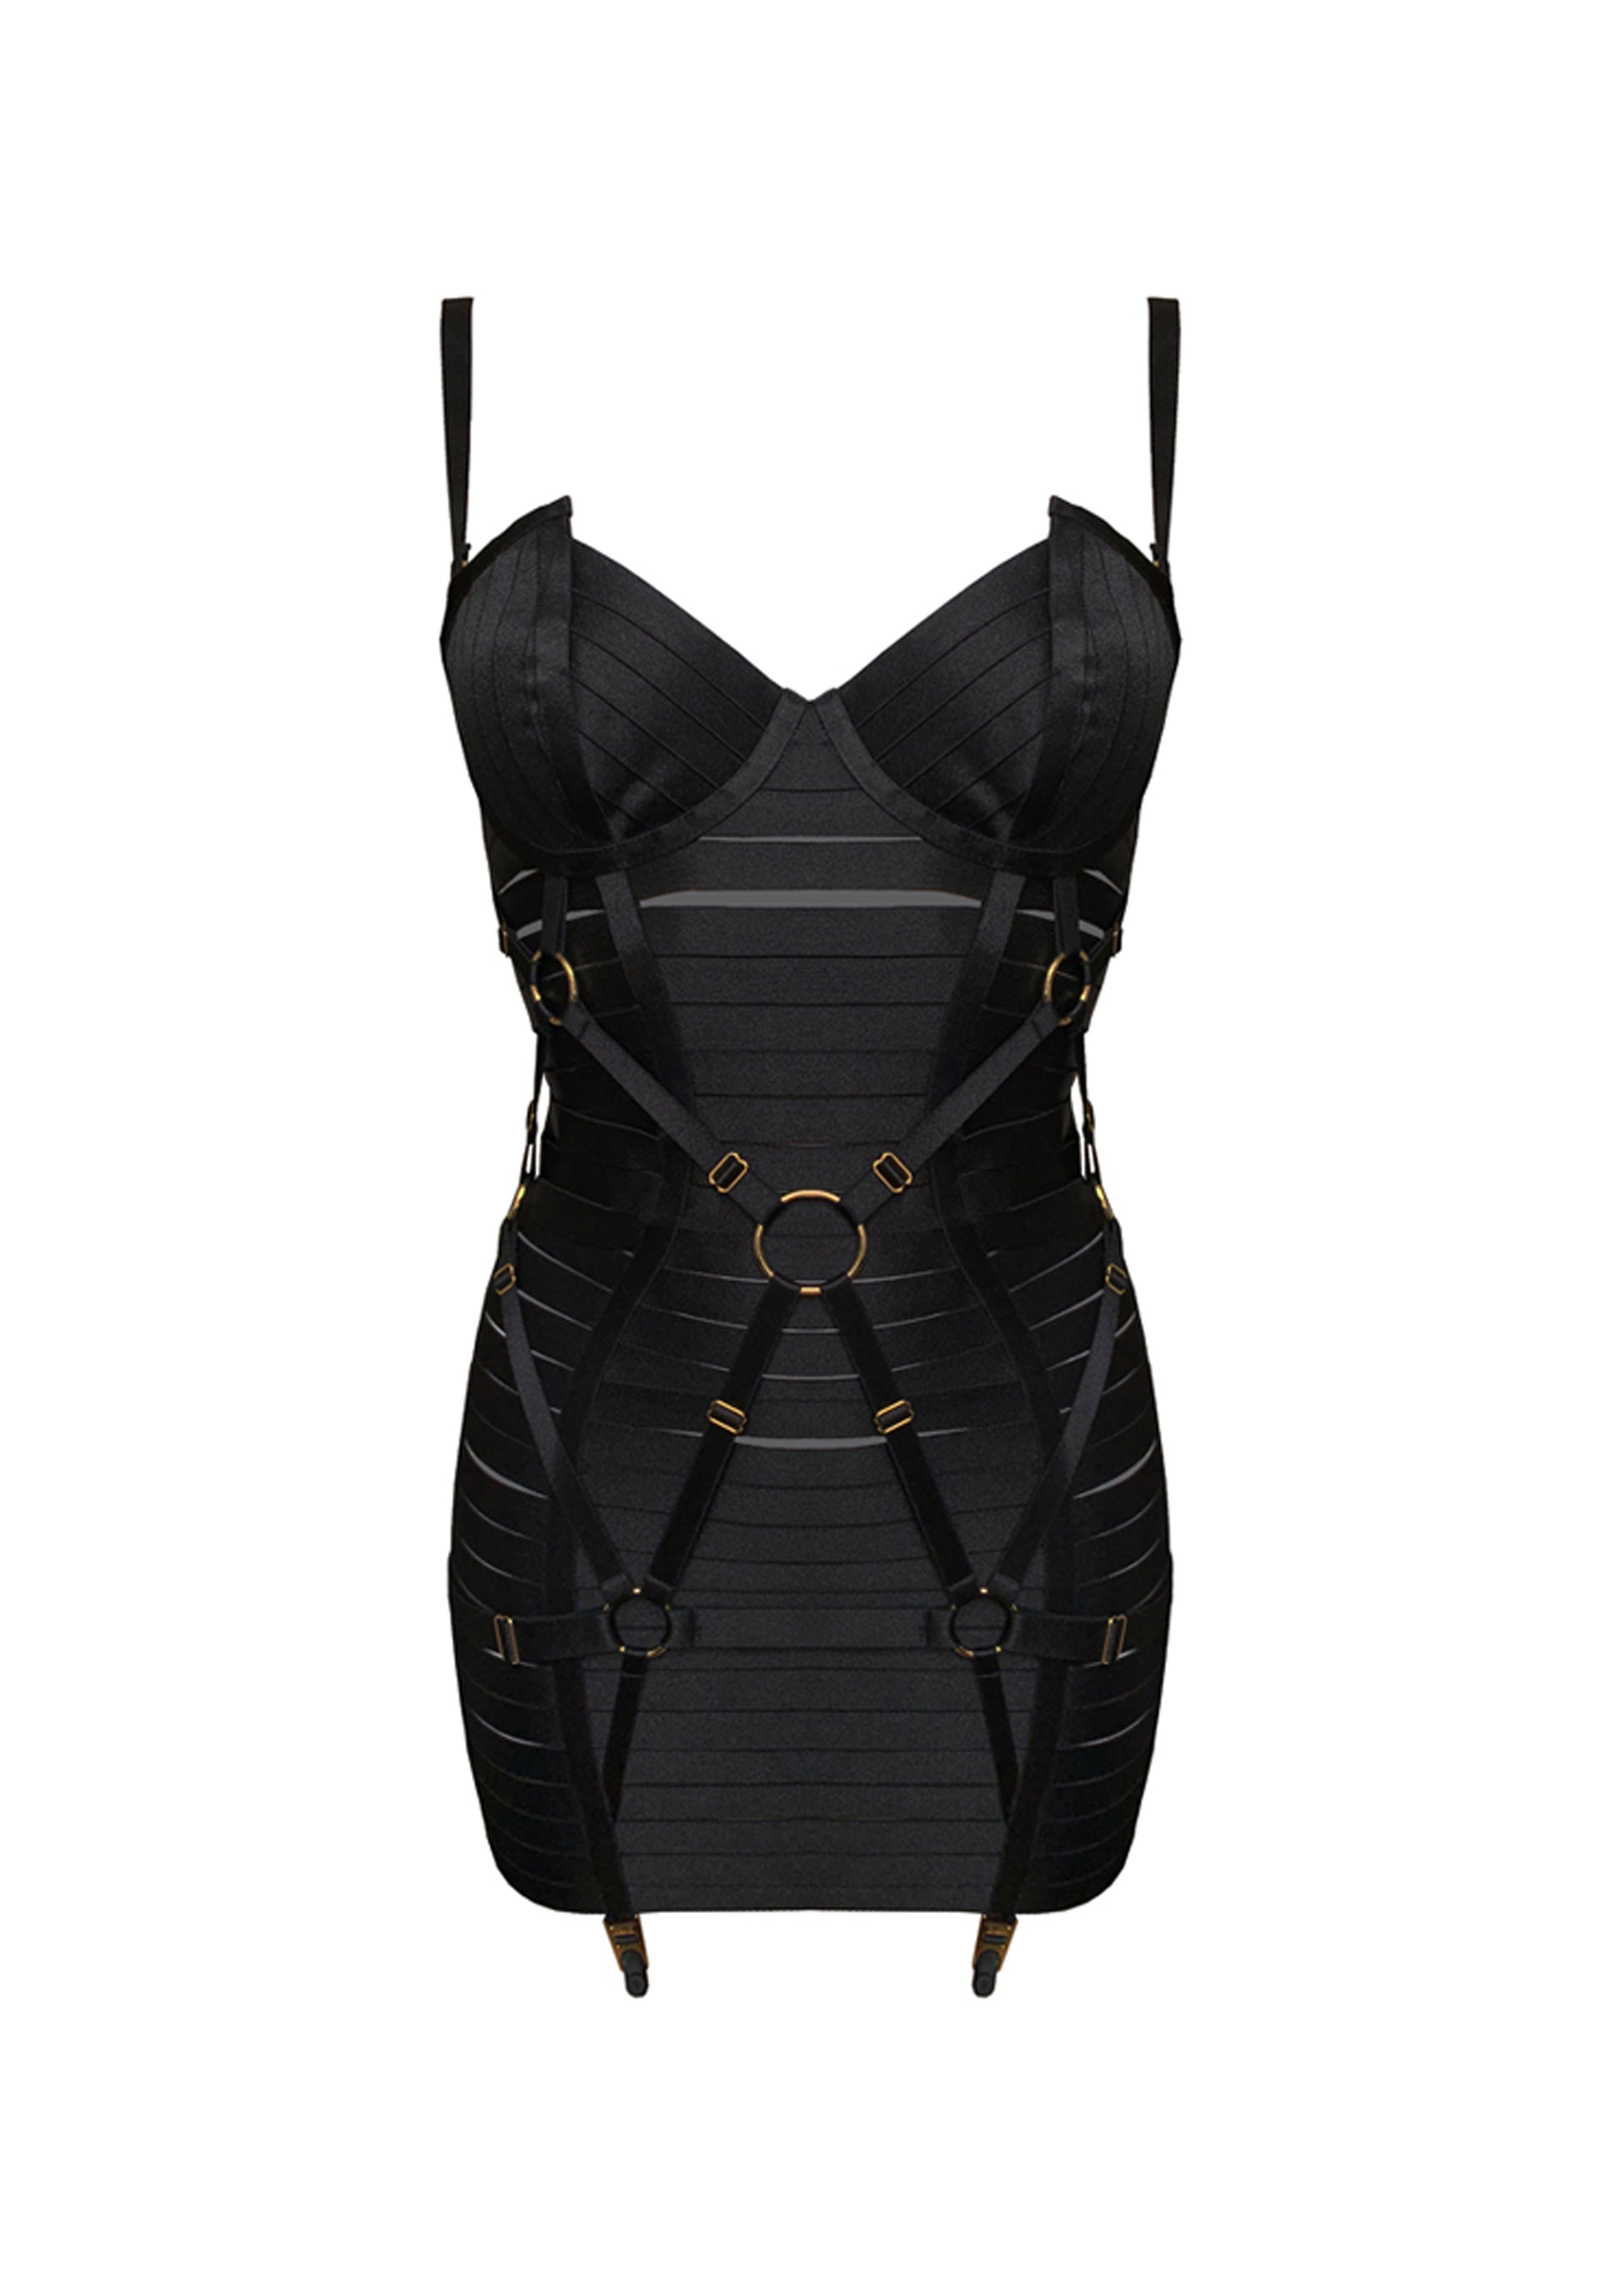 Hearted Corsets: The Angela Girdle Dress is Sizzling and Adorable